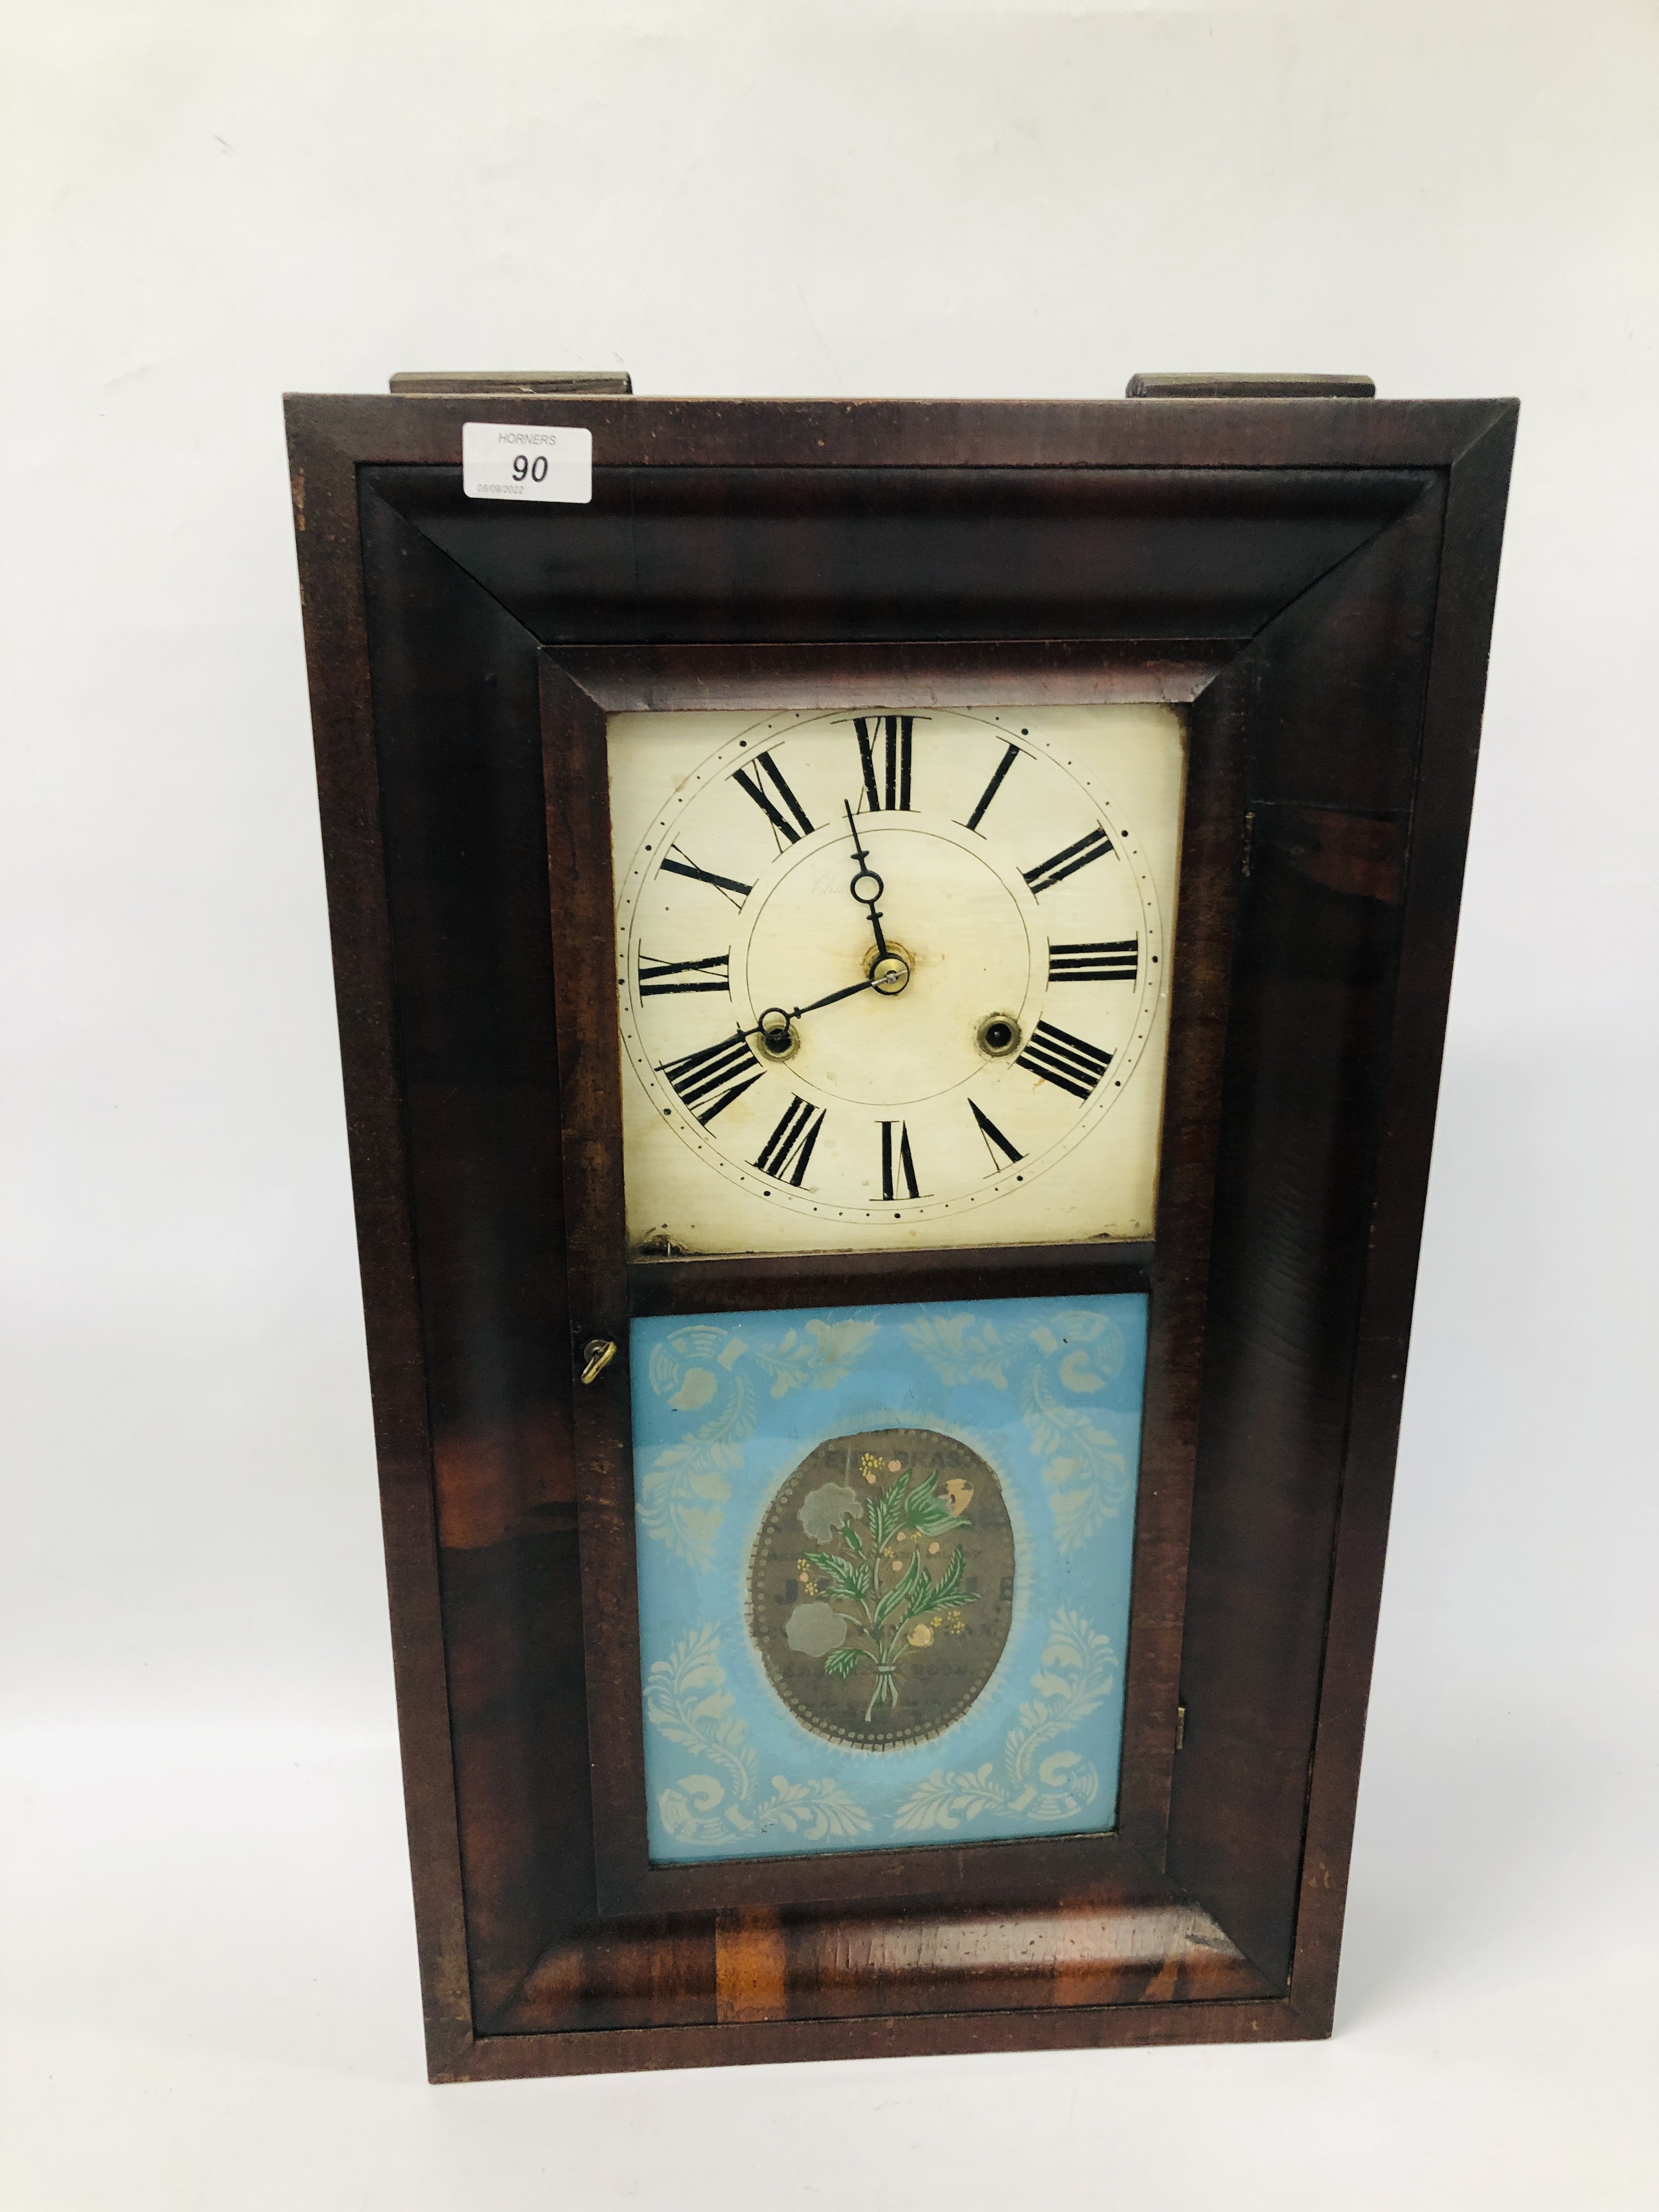 A VINTAGE C JEROME AMERICAN WALL CLOCK WITH KEY AND WEIGHTS,